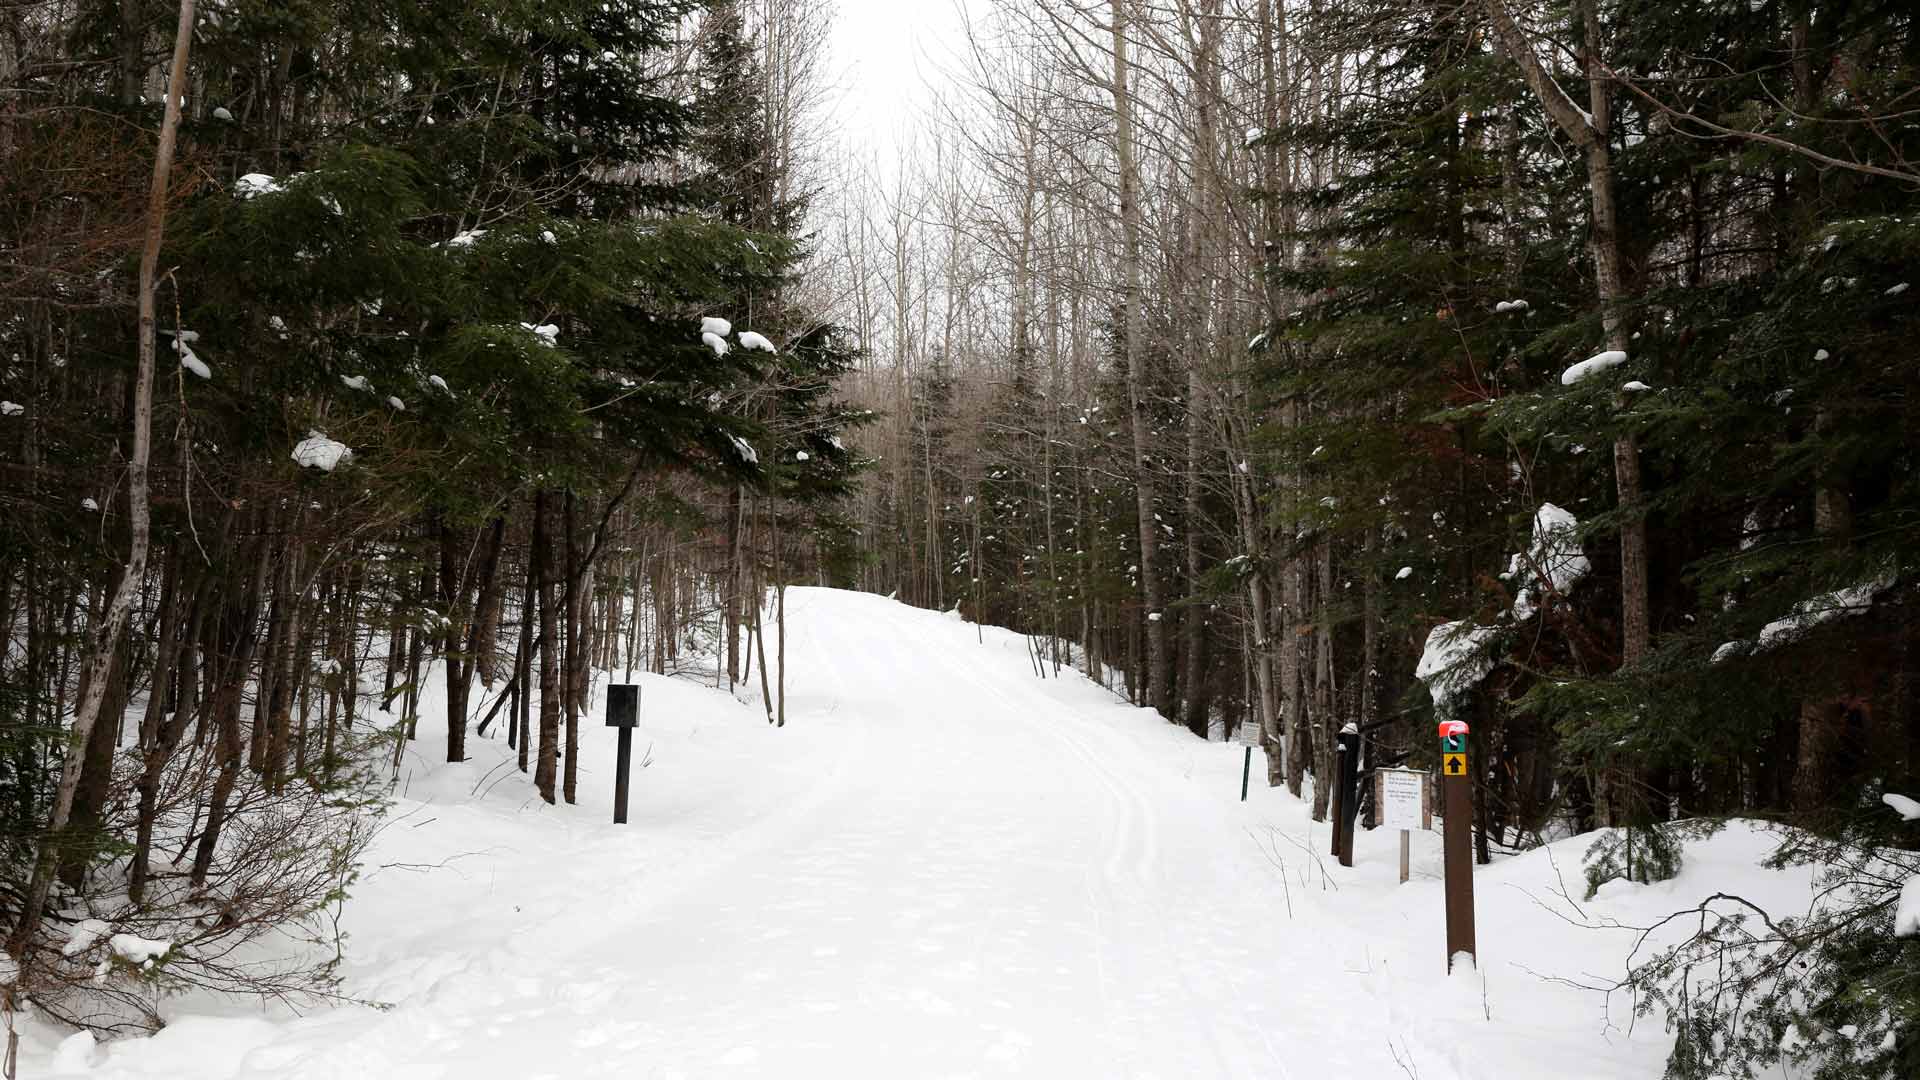 Winter path through Catherine Wolter Wilderness Area in Vilas County, WI